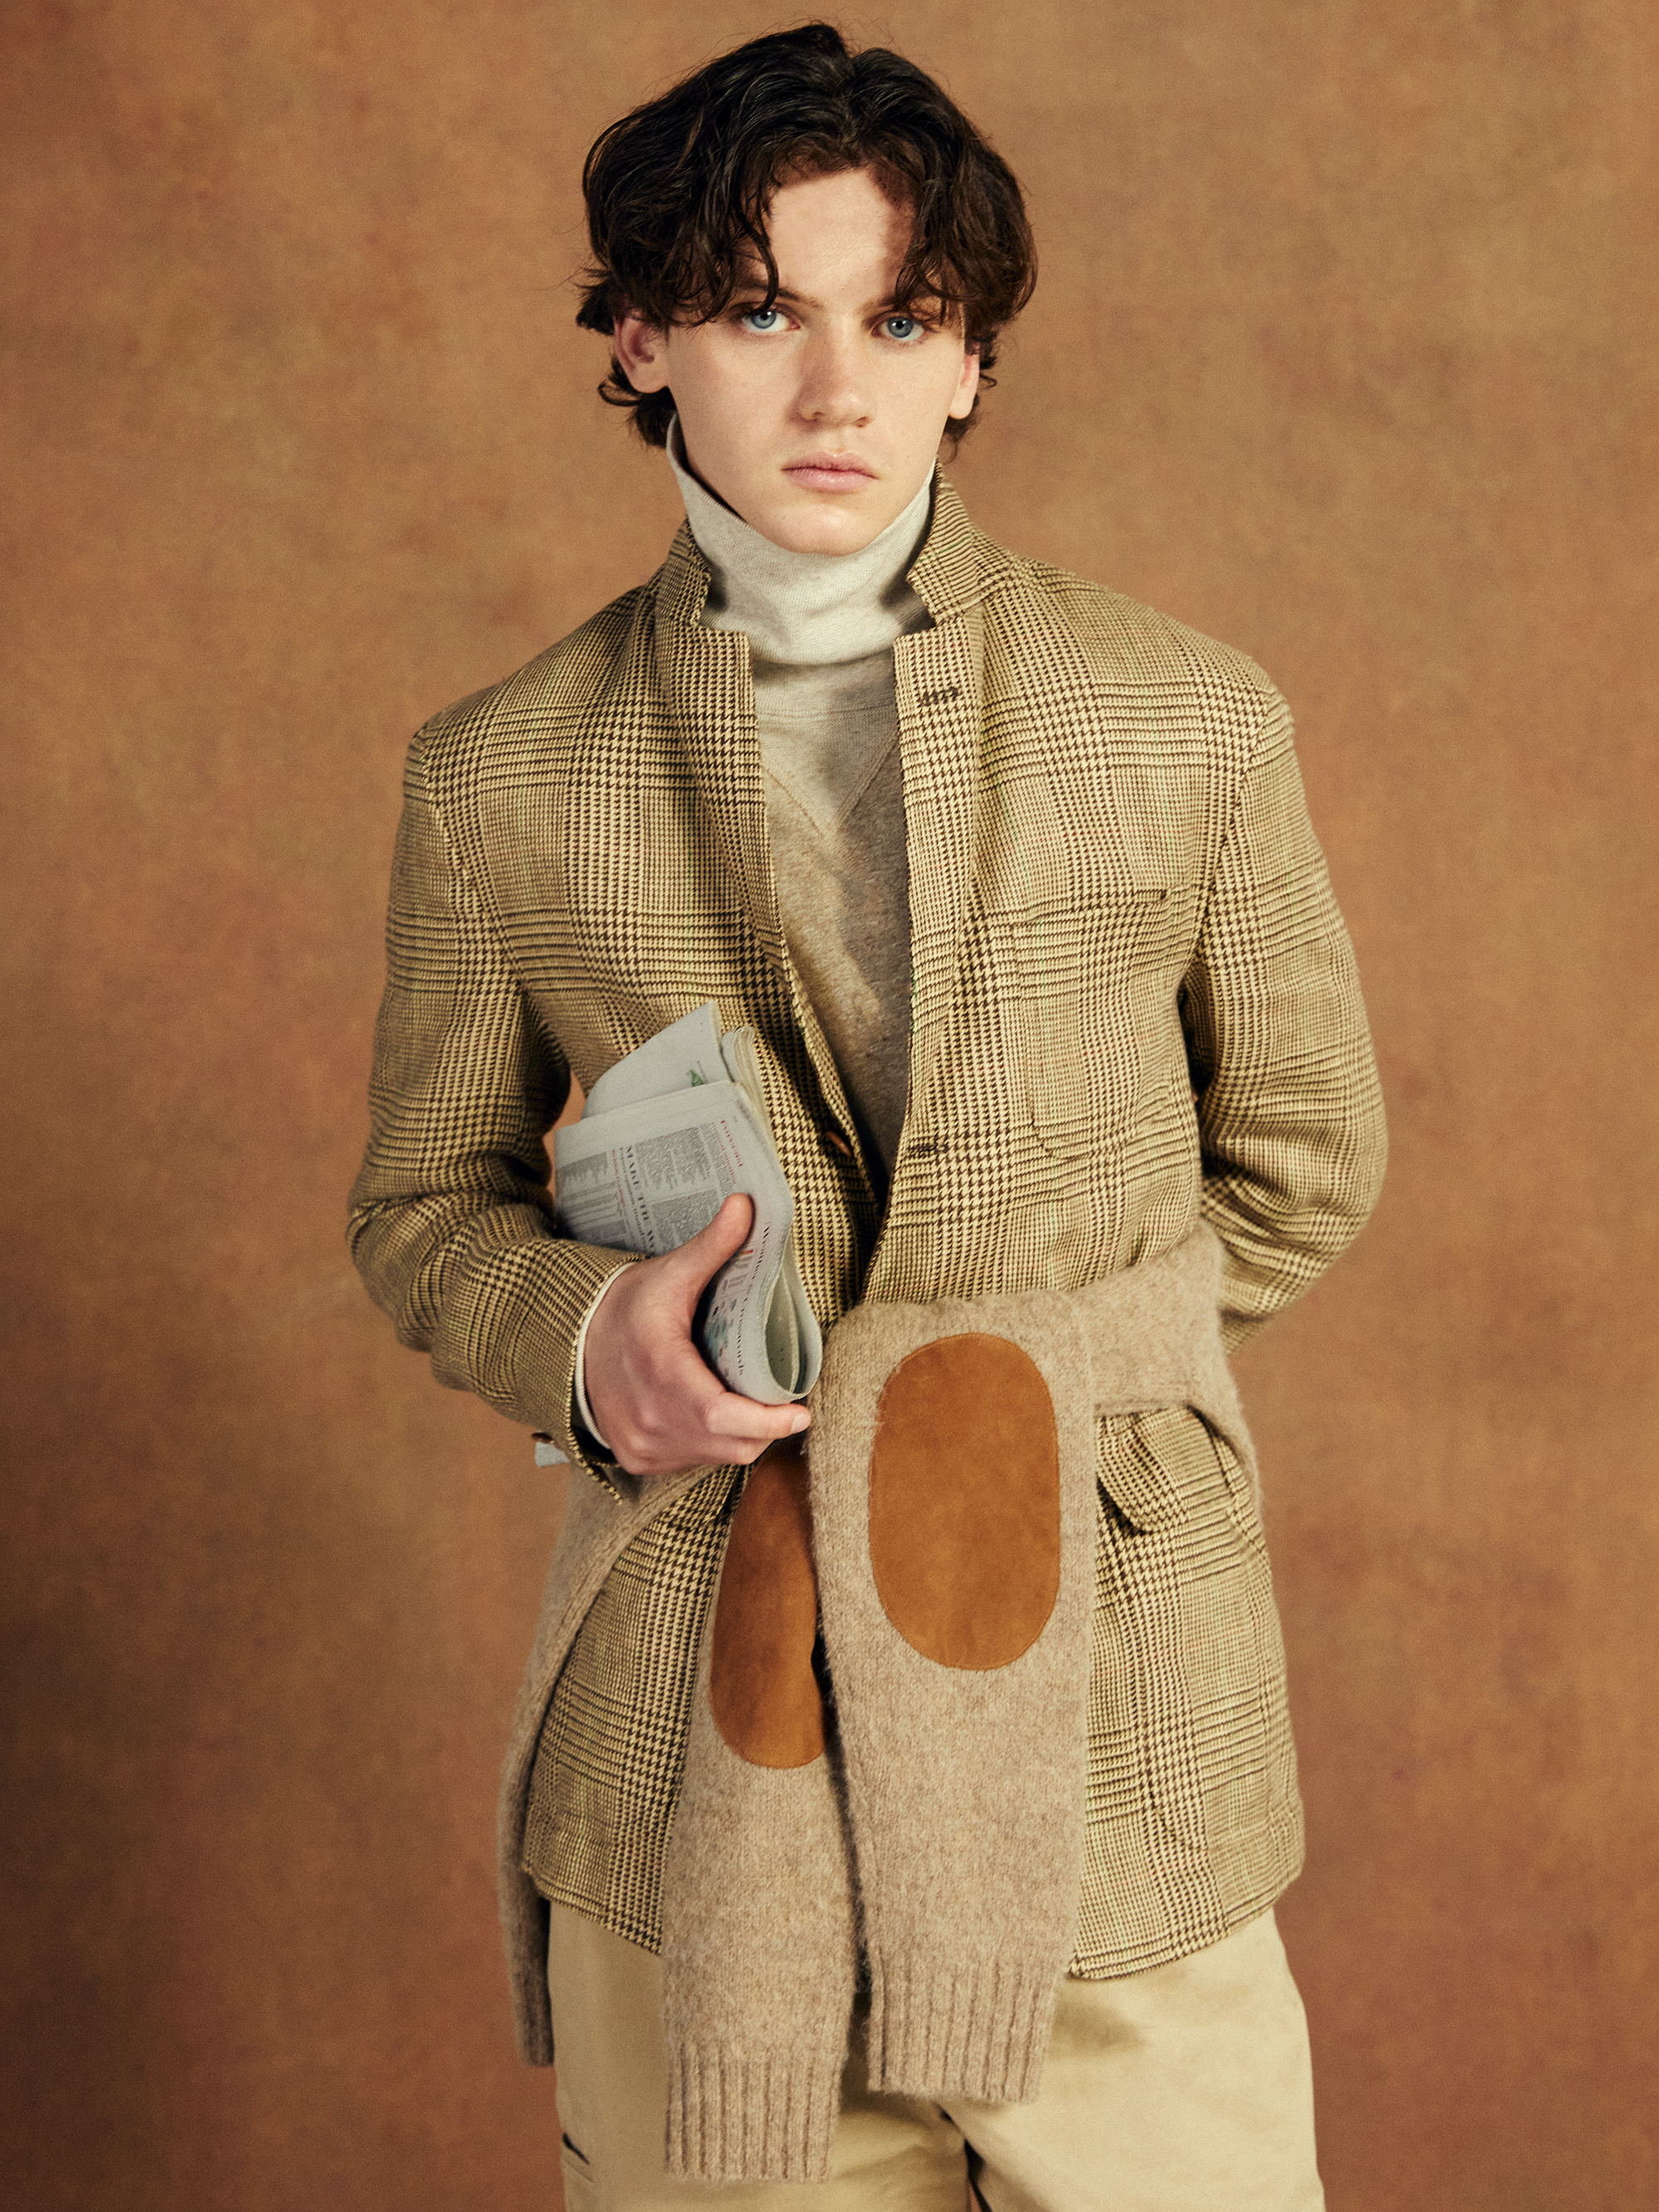 Model poses in a timeless tweed suit